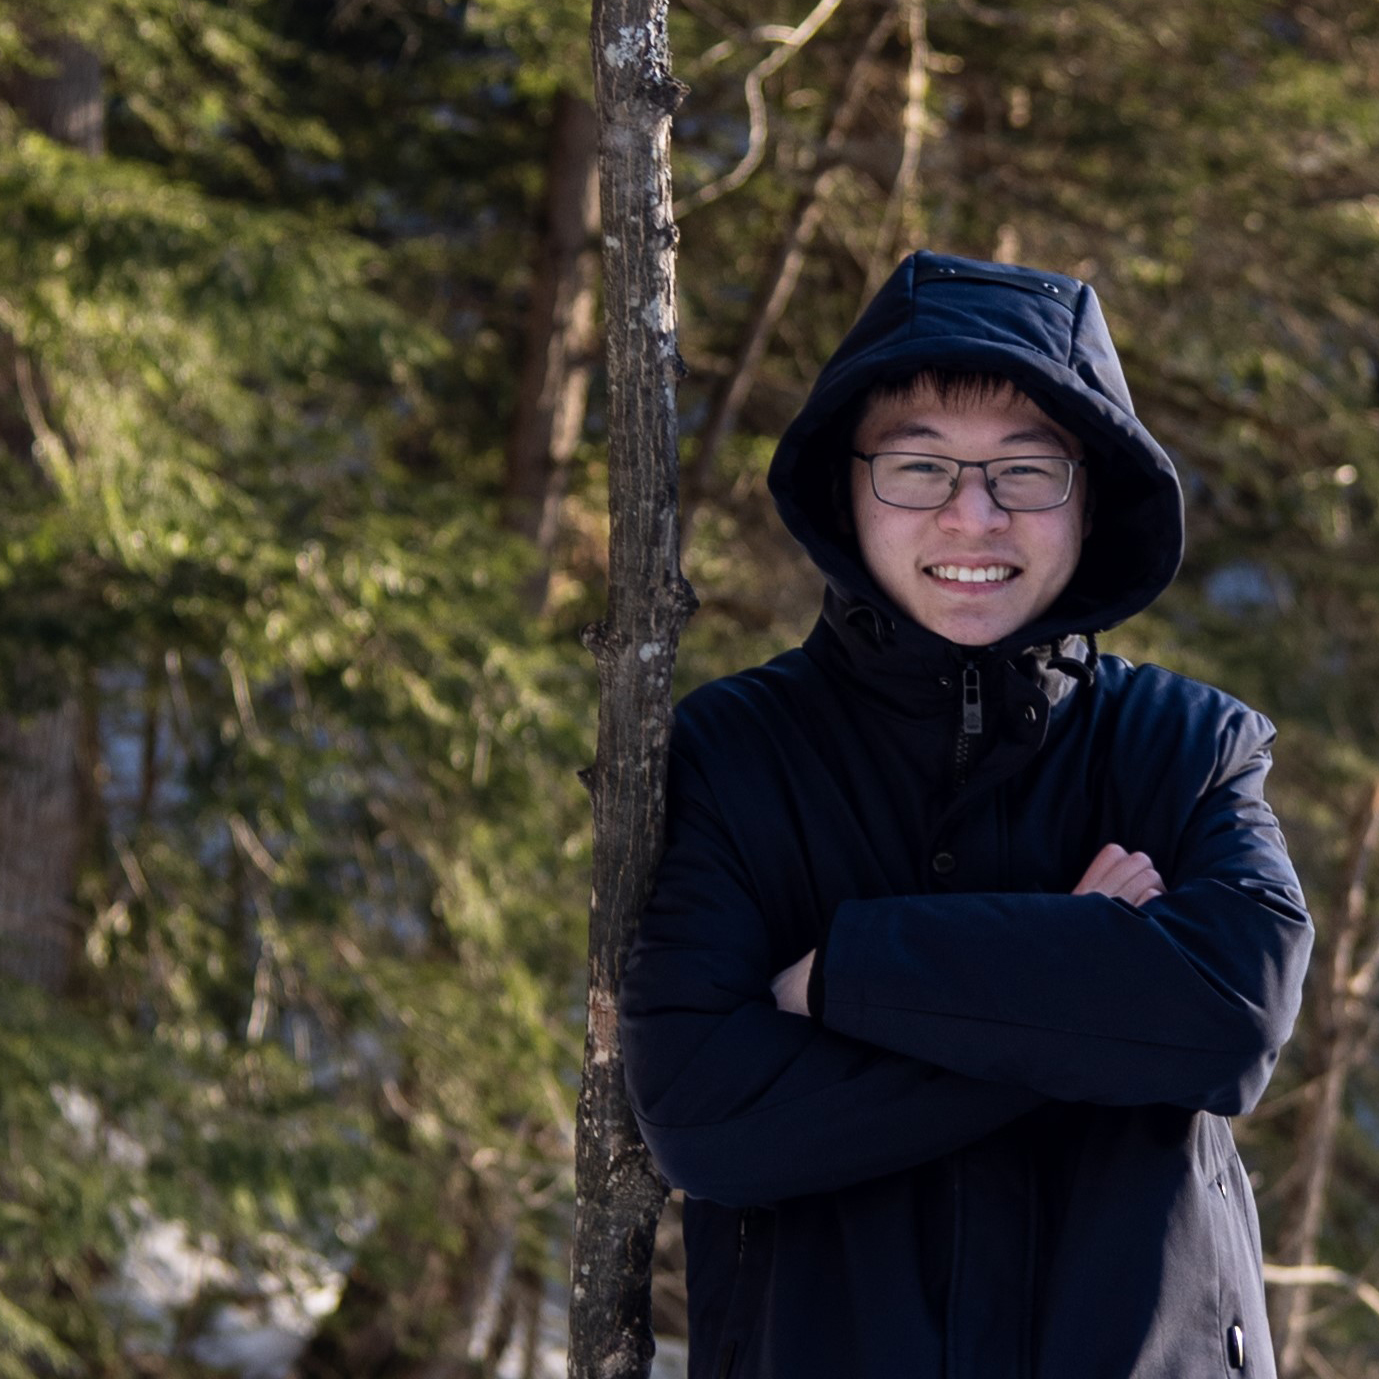 A young Asian man in a hooded jacket stands in a forest, grinning.